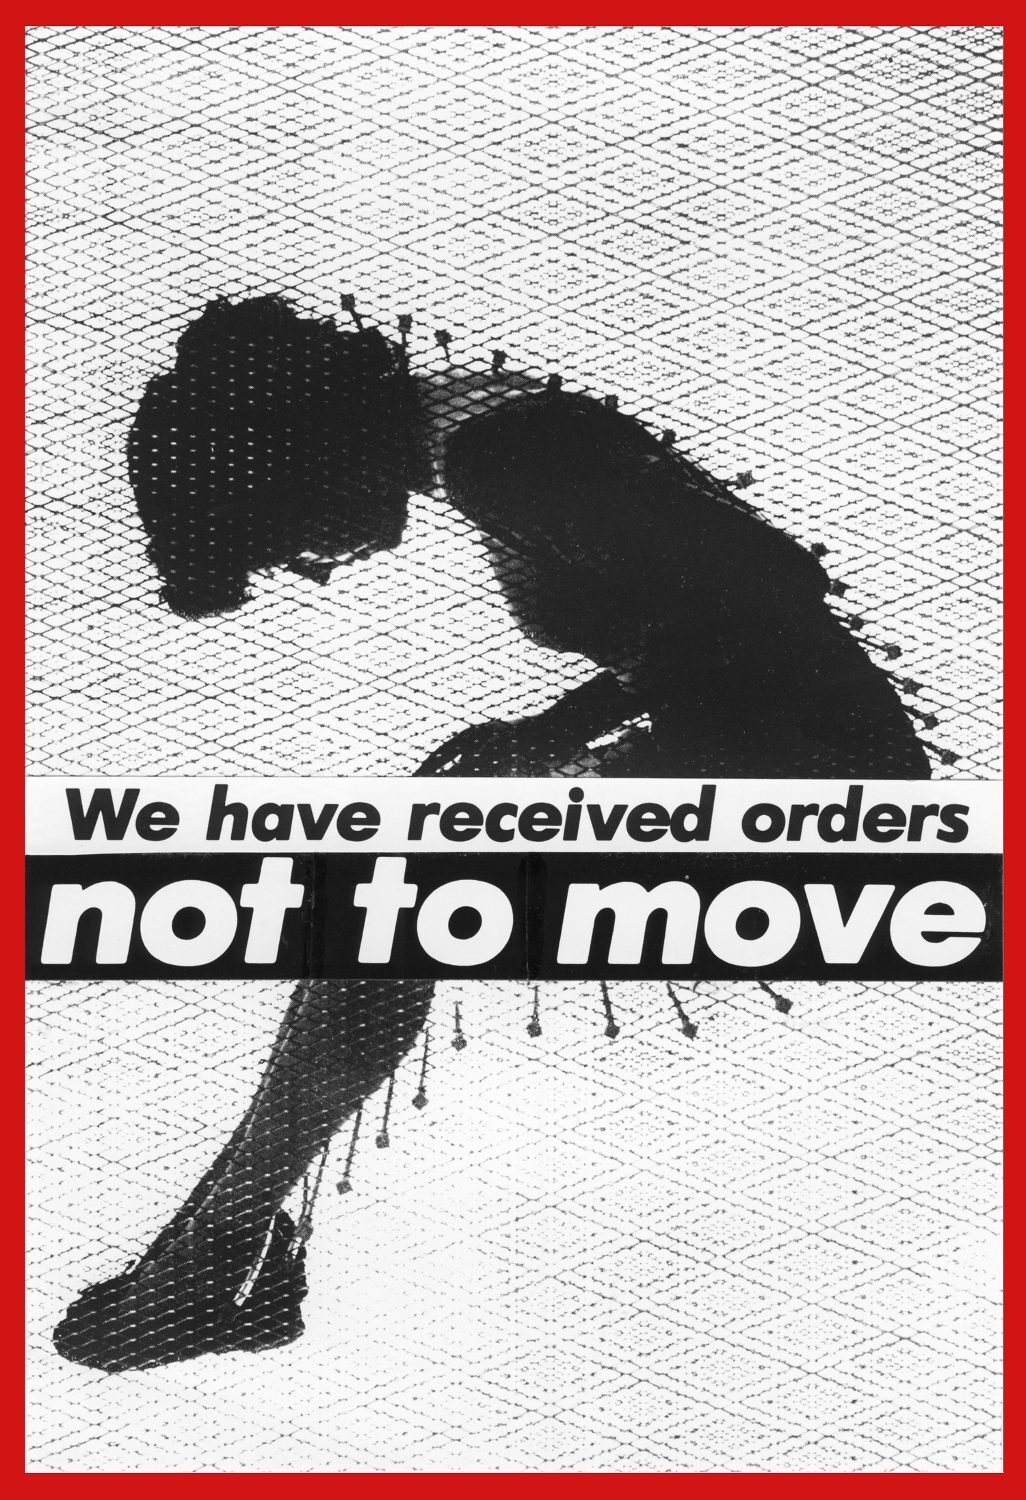 Barbara Kruger, Untitled (We have received orders not to move), 1982. Susan Bay-Nimoy and Leonard Nimoy, Courtesy Mary Boone Gallery, New York © Barbara Kruger. Zdroj: awarewomenartists.com.